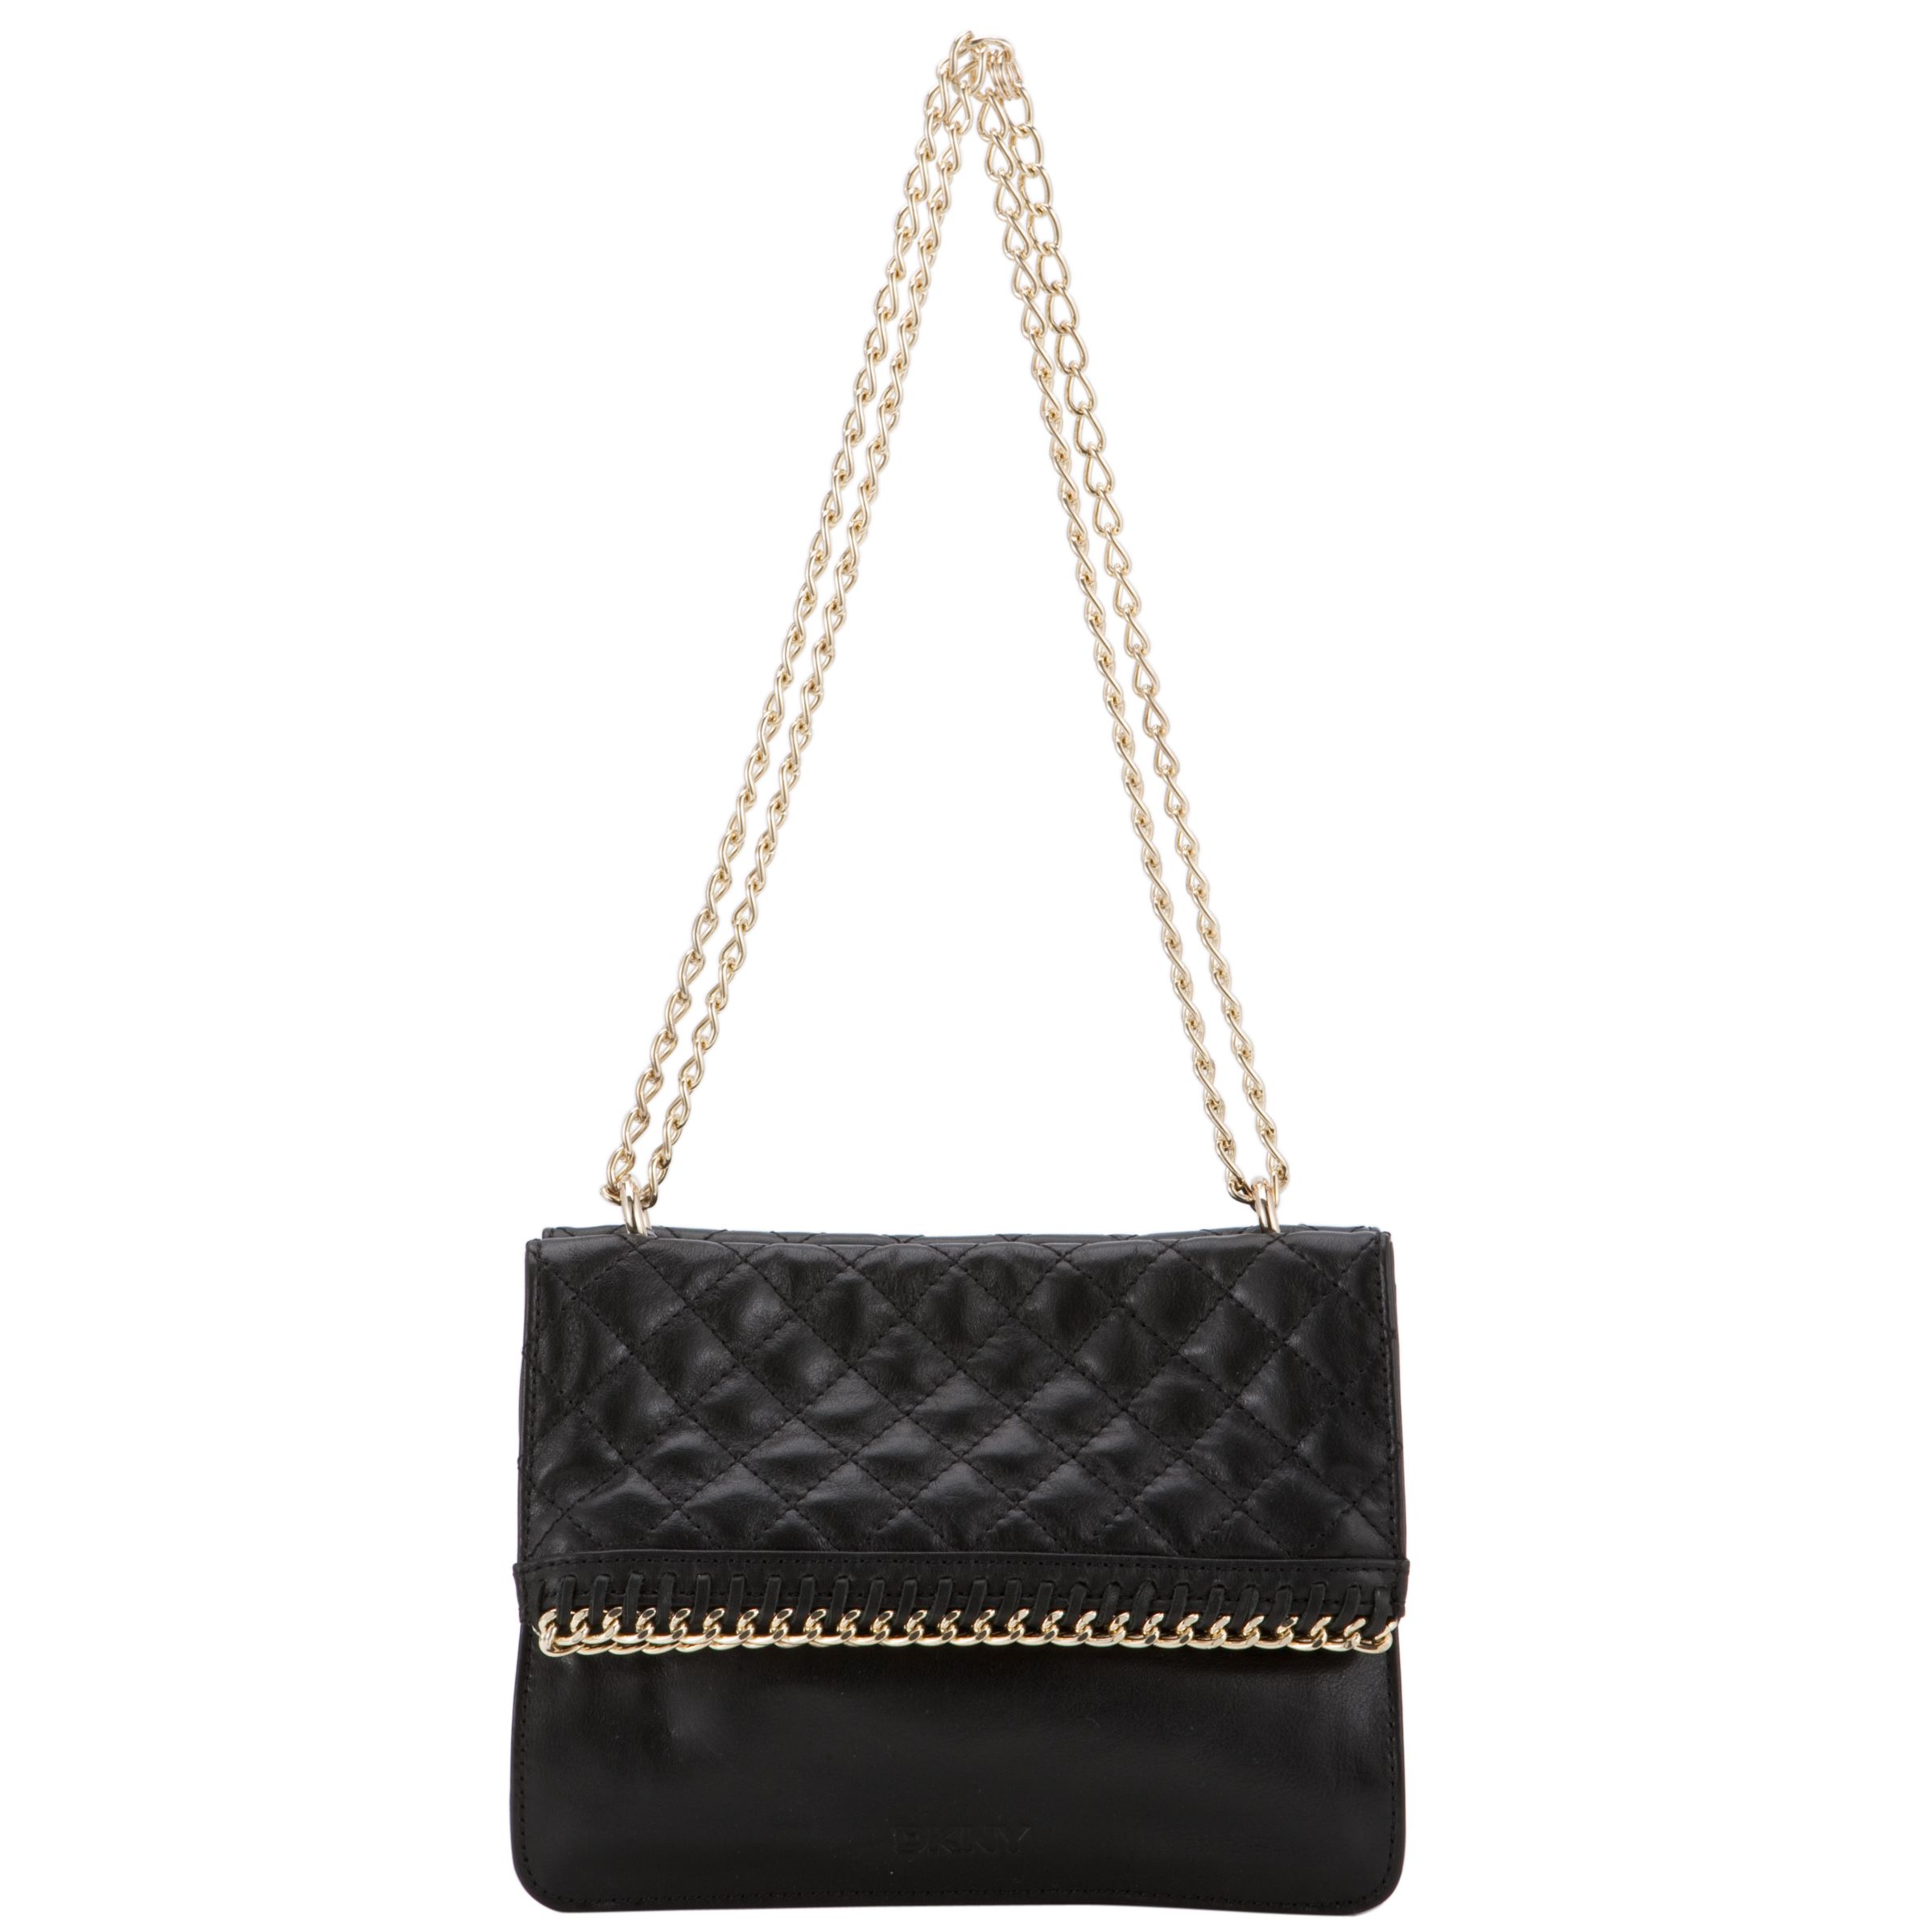 DKNY Quilted Leather Chain Across Body Handbag, Black at John Lewis